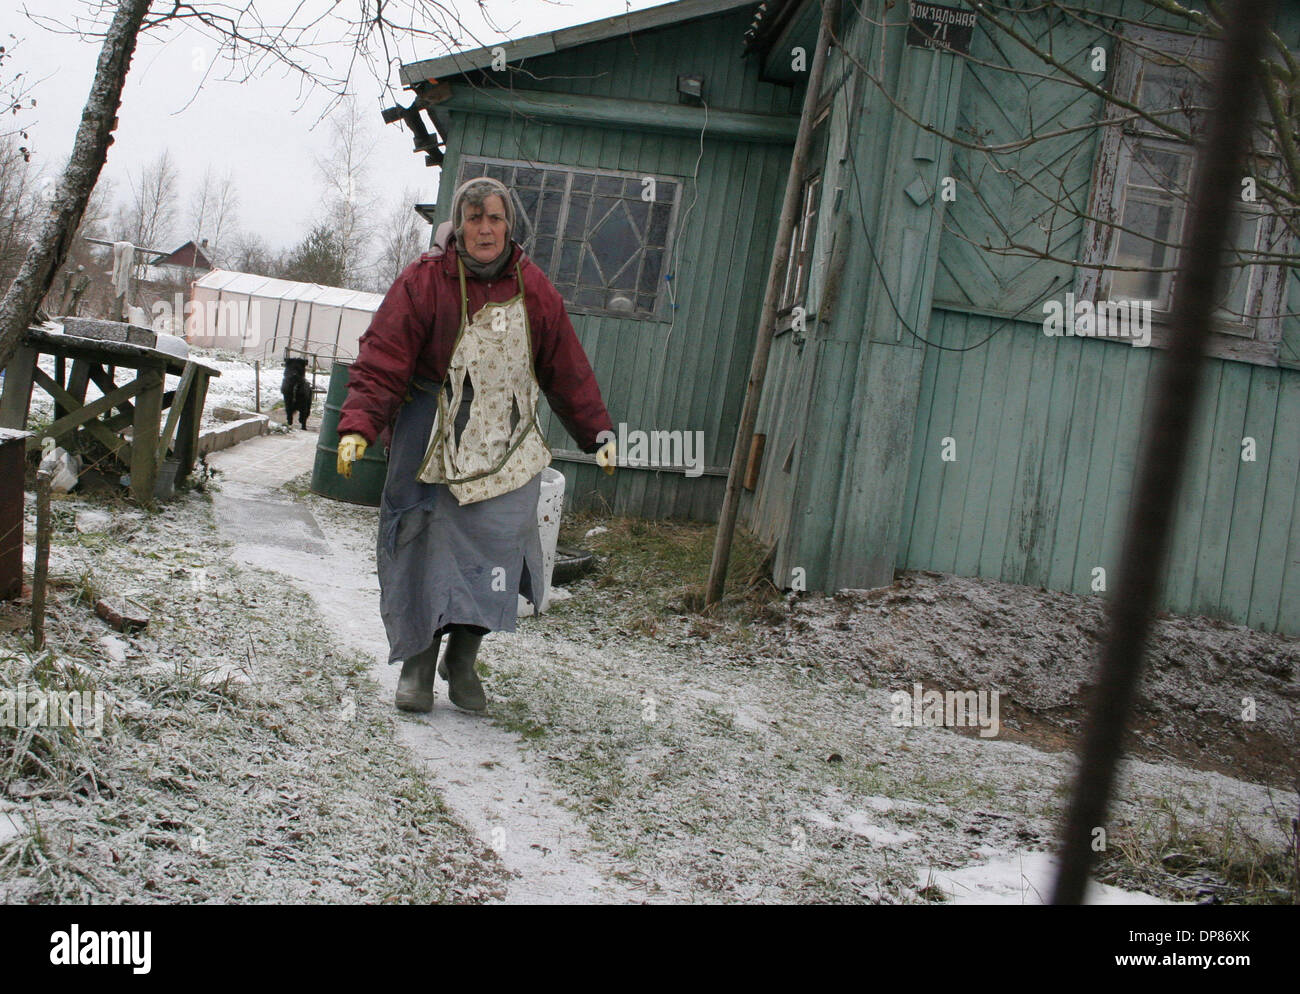 Sep 28, 2006 - Tosno, Russia - Country house (Dacha) that belonged to the parents of Russian president Vladimir Putin. The Dacha is located in Tosno area of Leningrad region. PICTURED - Nadezhda Pankova, a Russian refugee from Kazakhstan who bought this dacha in 1999. (Credit Image: © PhotoXpress/ZUMA Press) Stock Photo